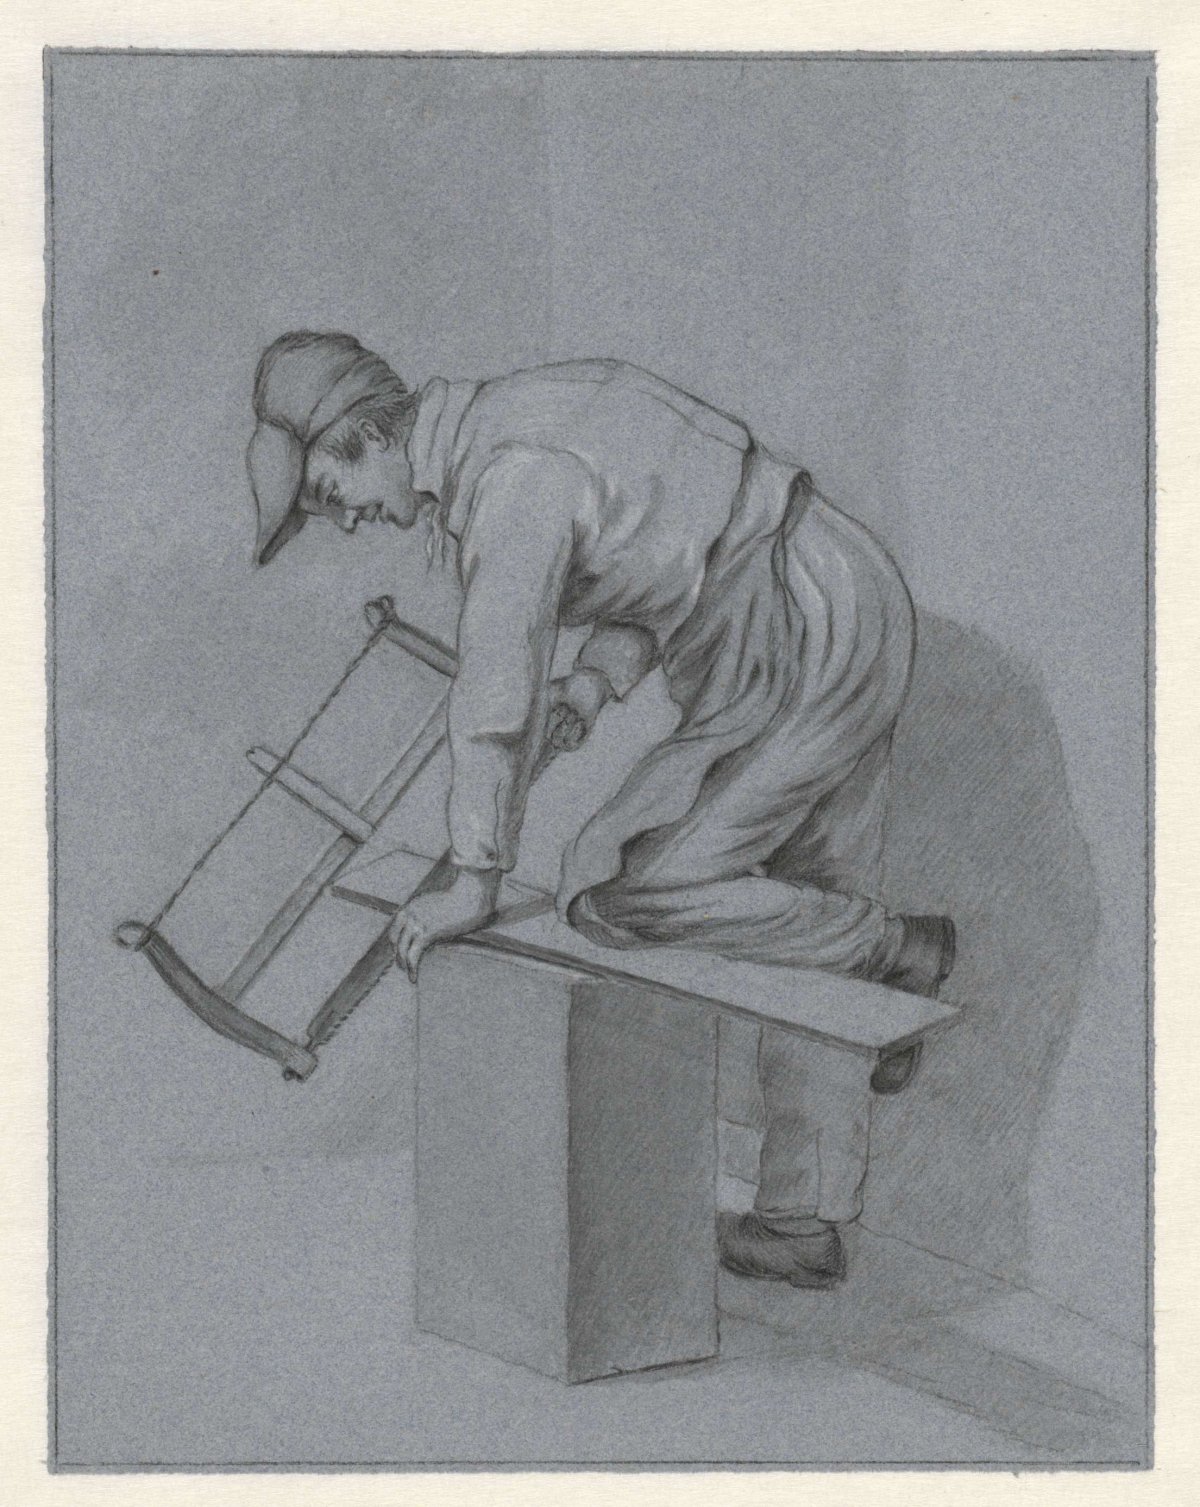 Sawing boy with cap, Ary Johannes Lamme, 1835